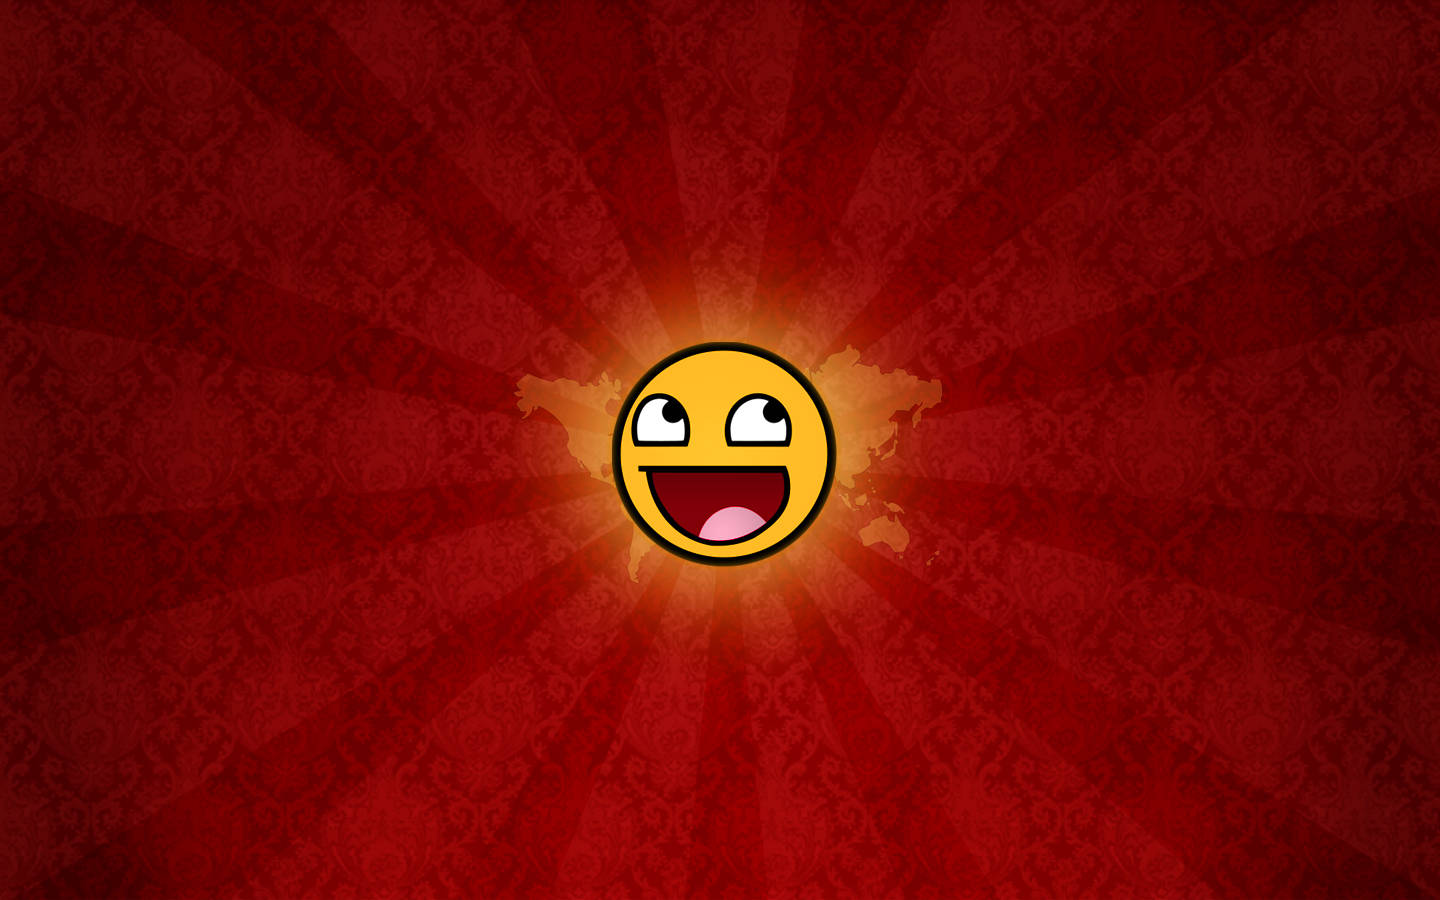 Awesome Epic Face Wallpaper